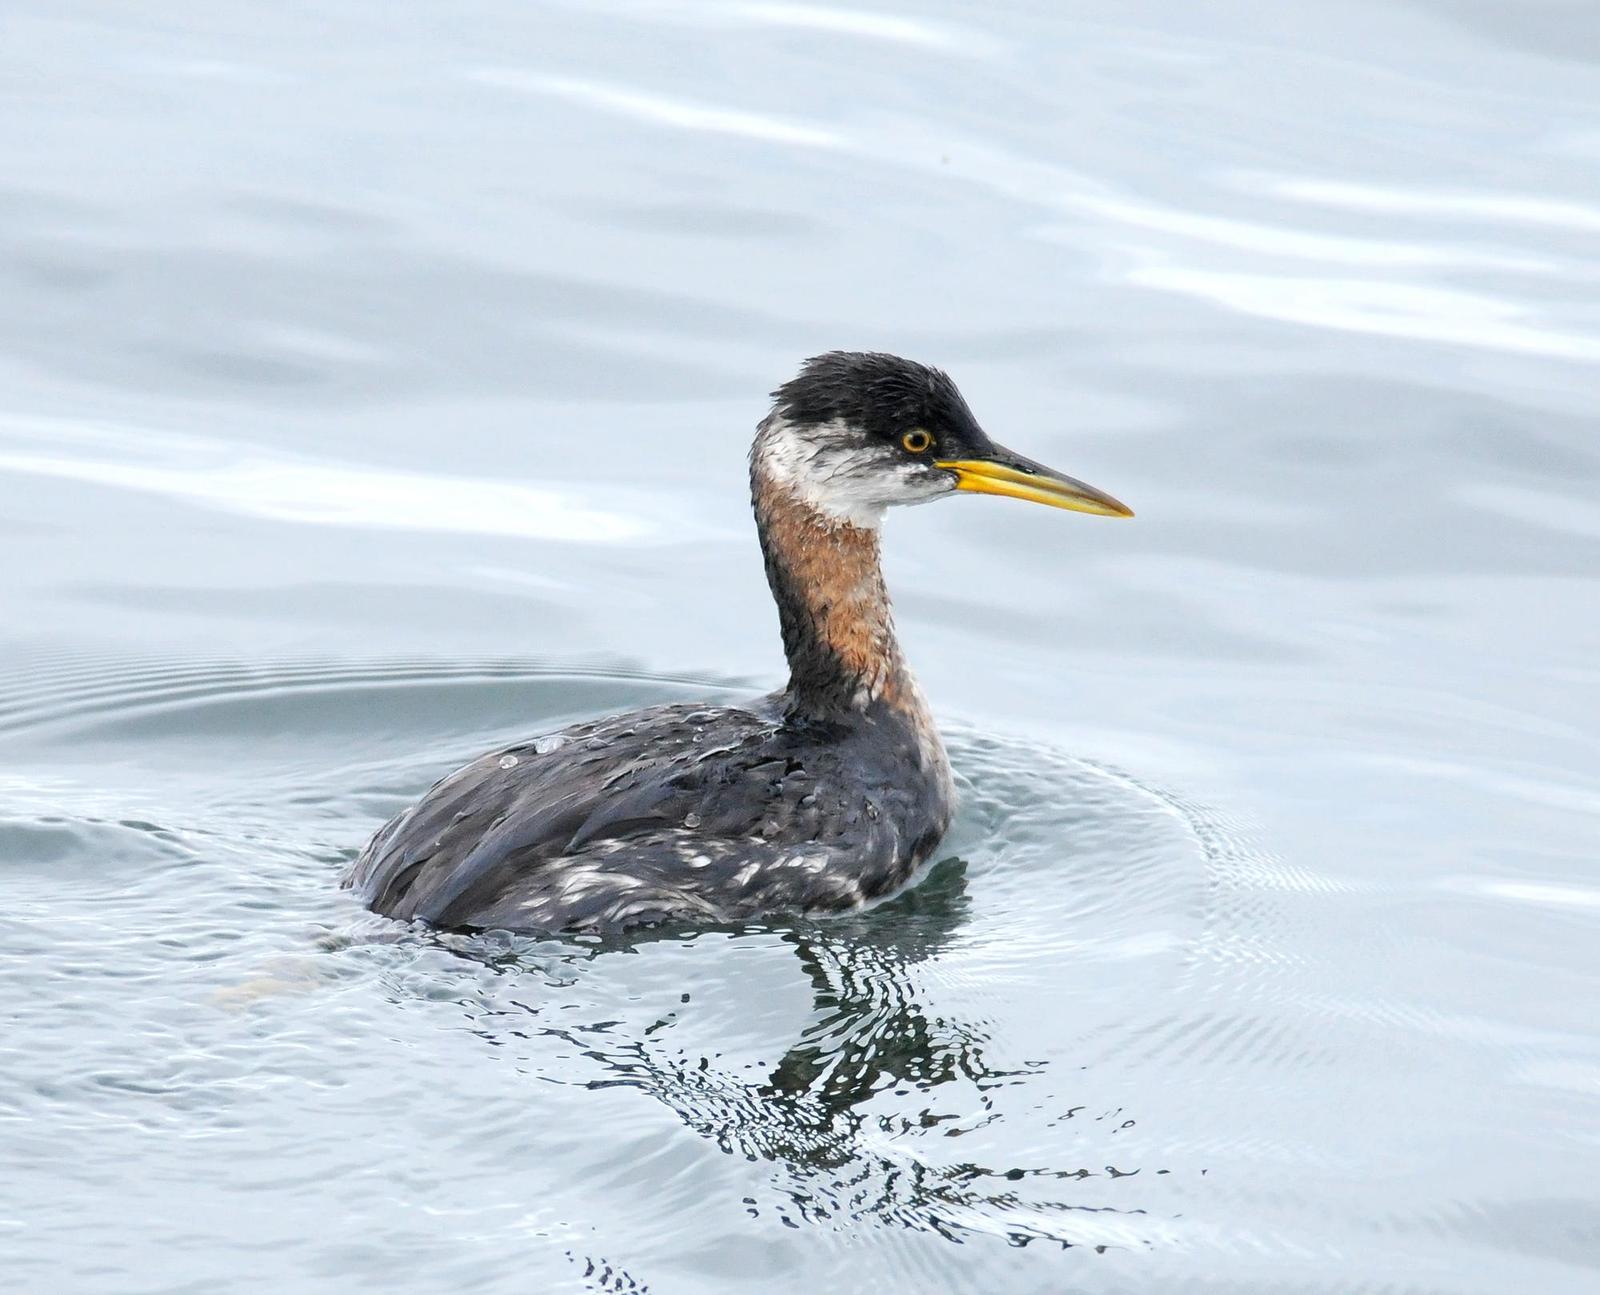 Red-necked Grebe Photo by Steven Mlodinow